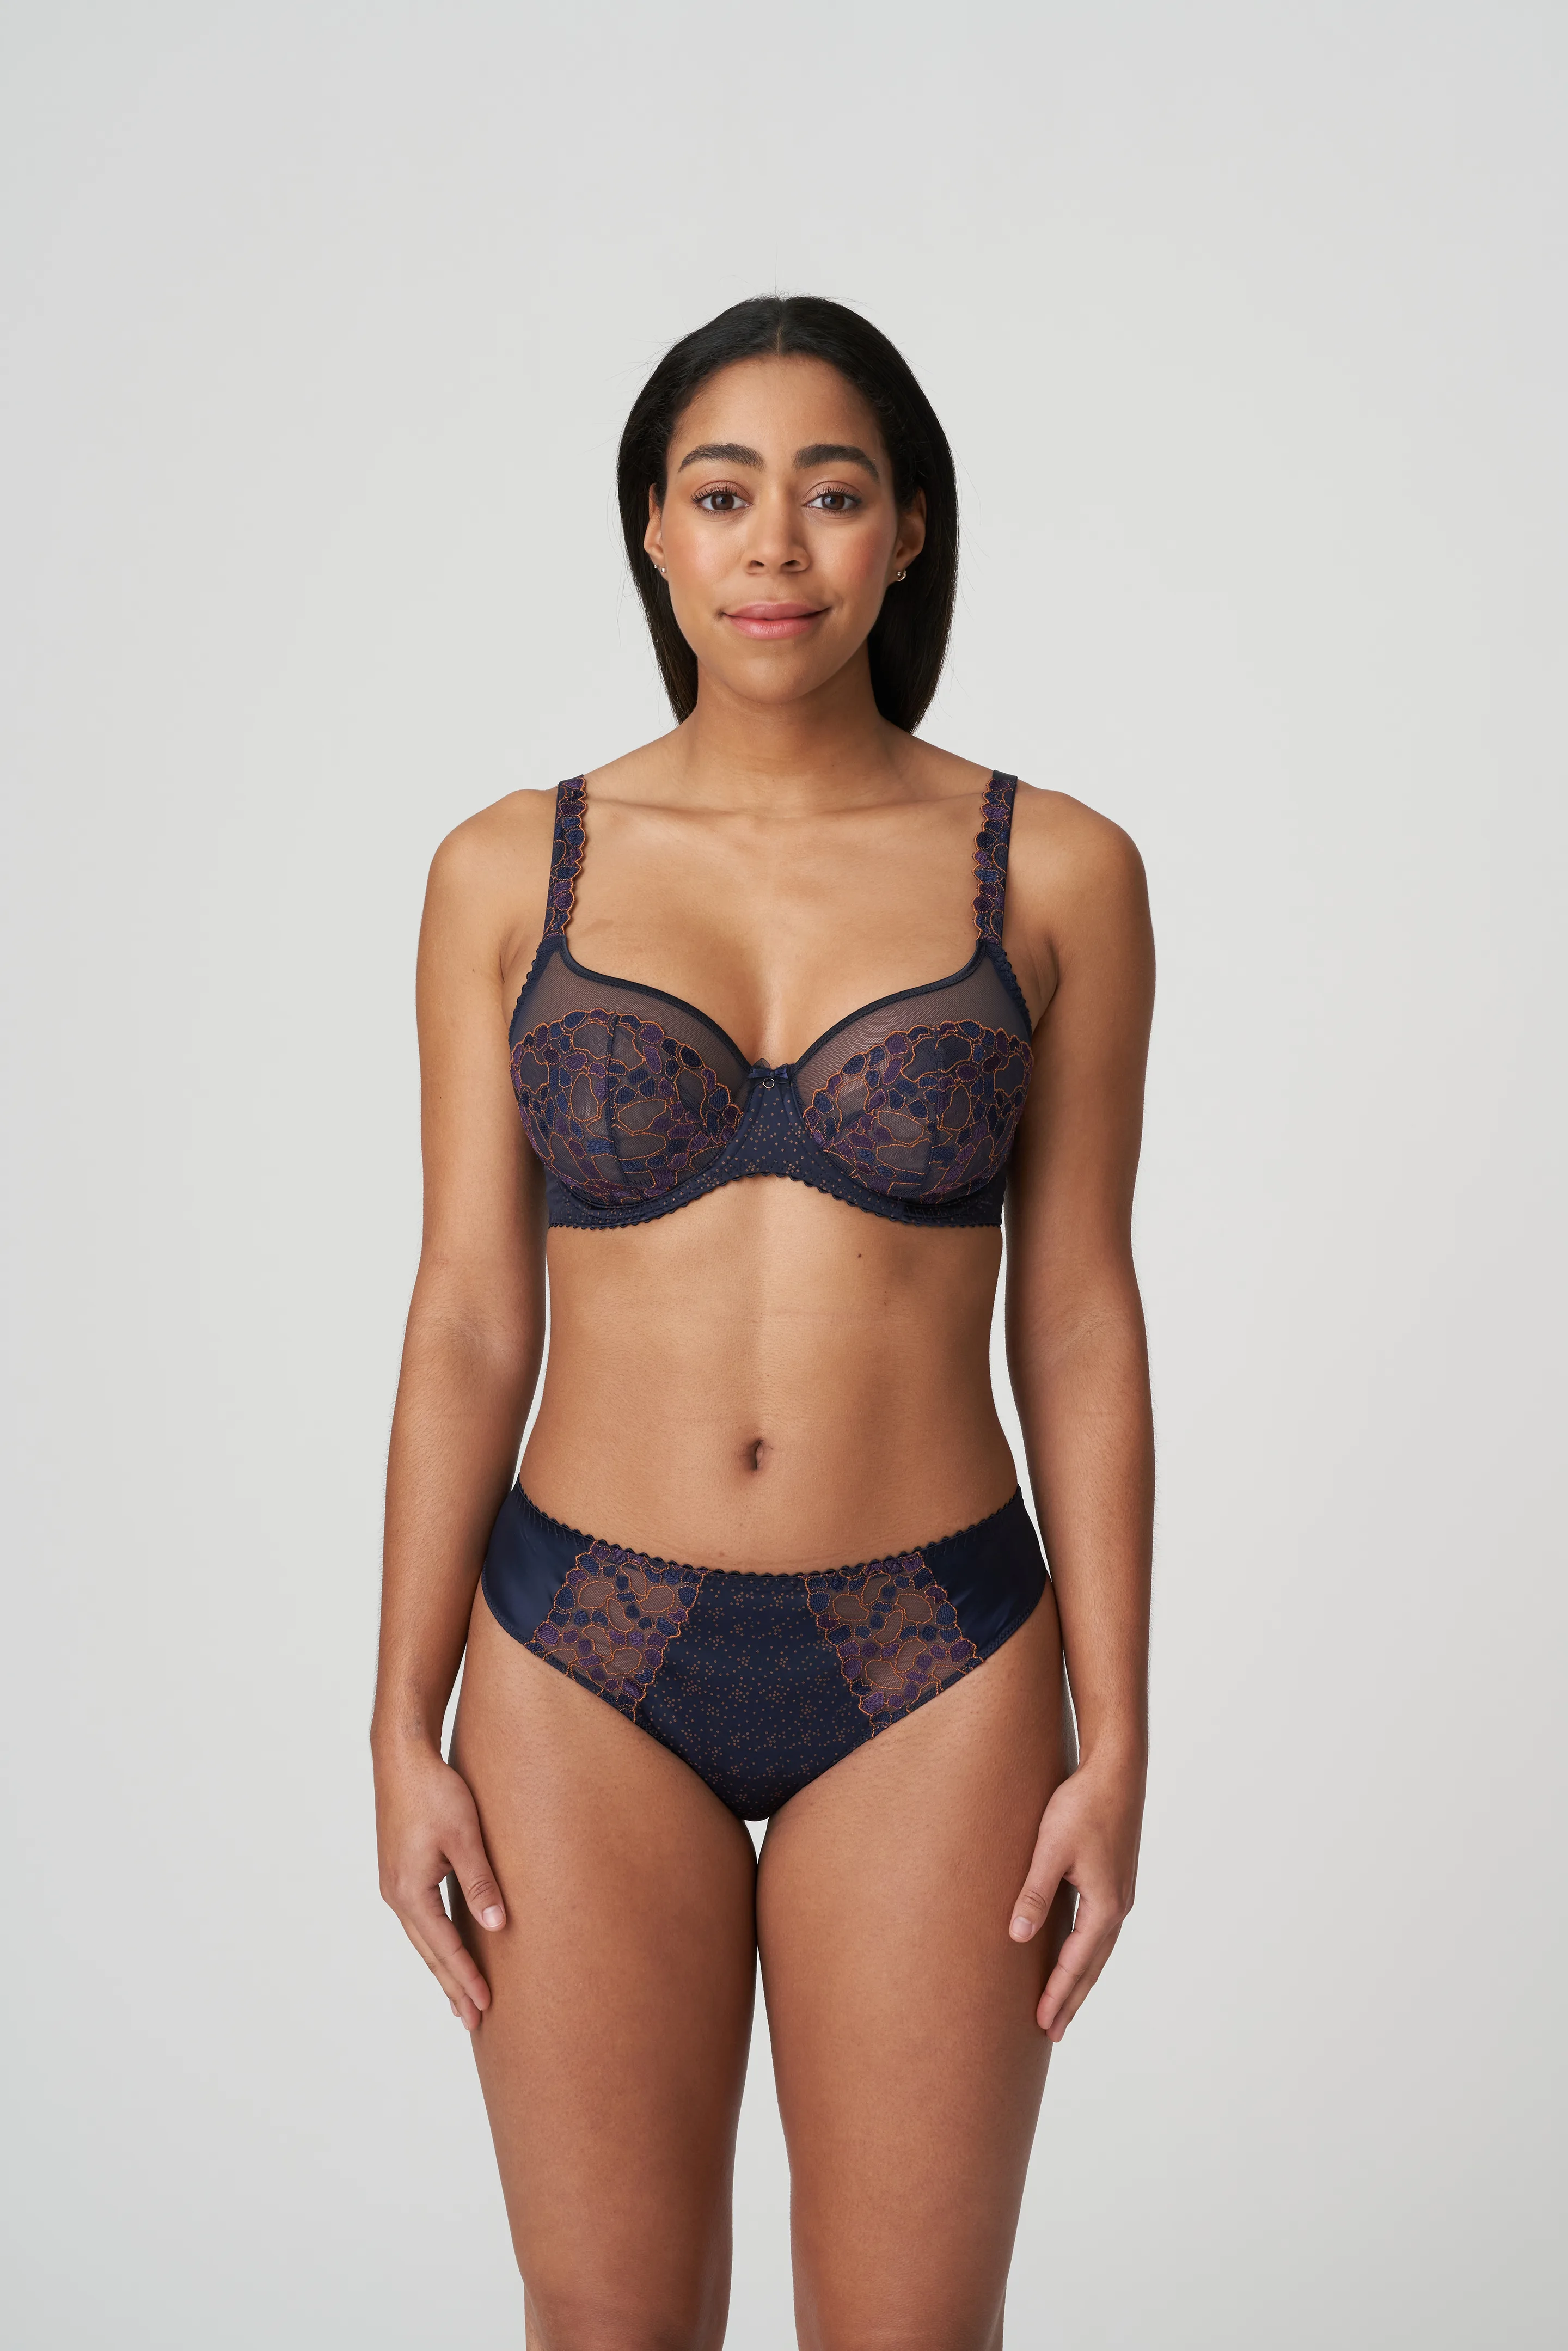 Balconette bras: support, style and sensuality